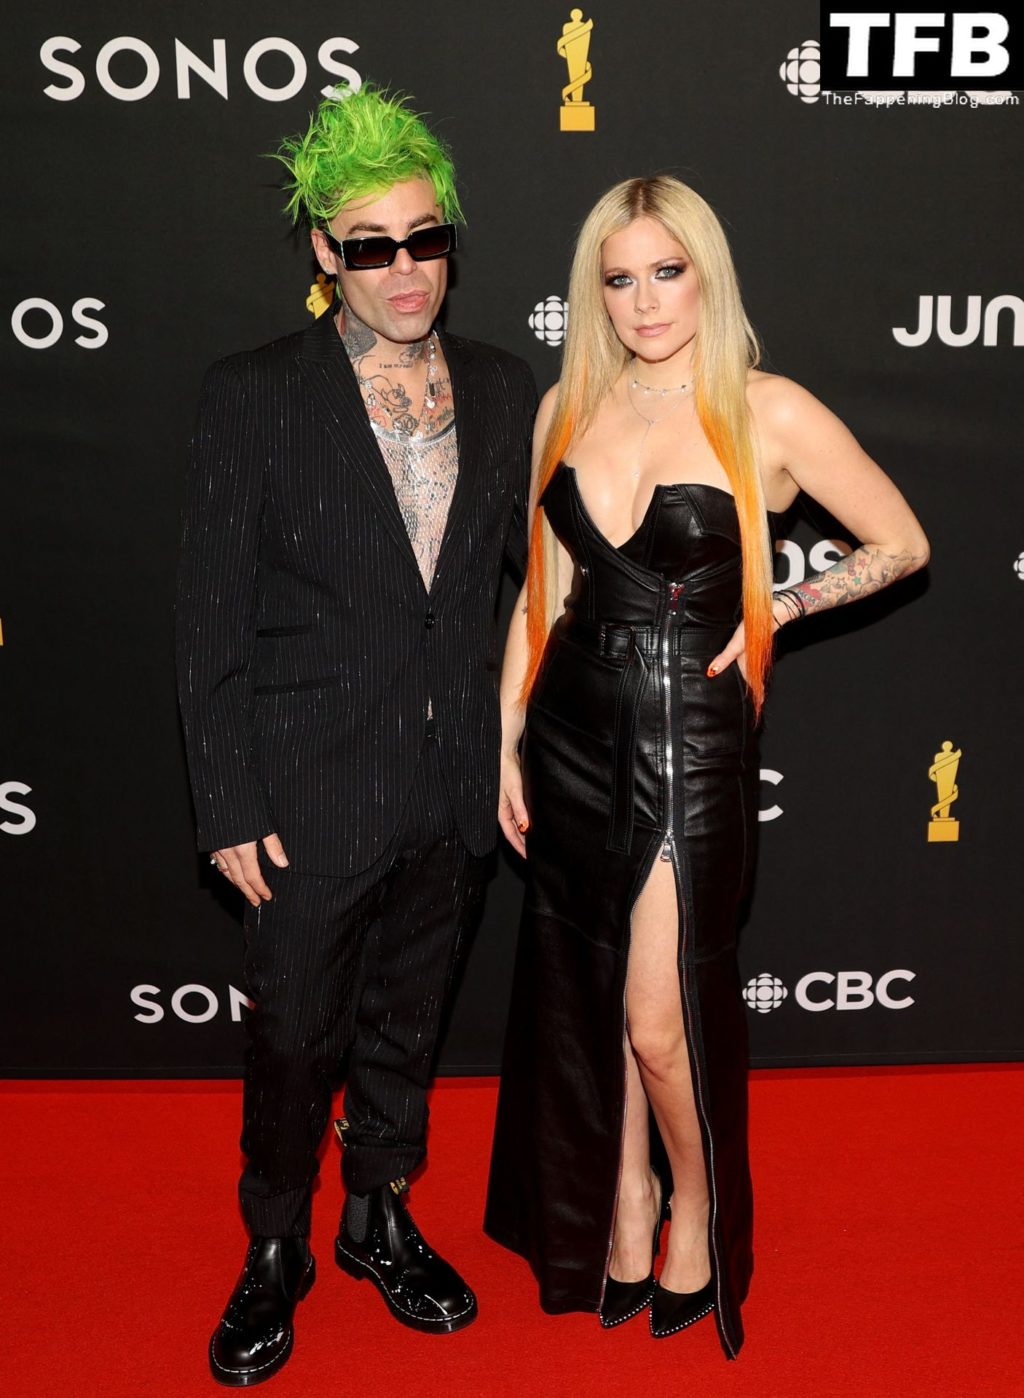 Avril Lavigne Flaunts Her Tits at the 51st Annual JUNO Awards (6 Photos)